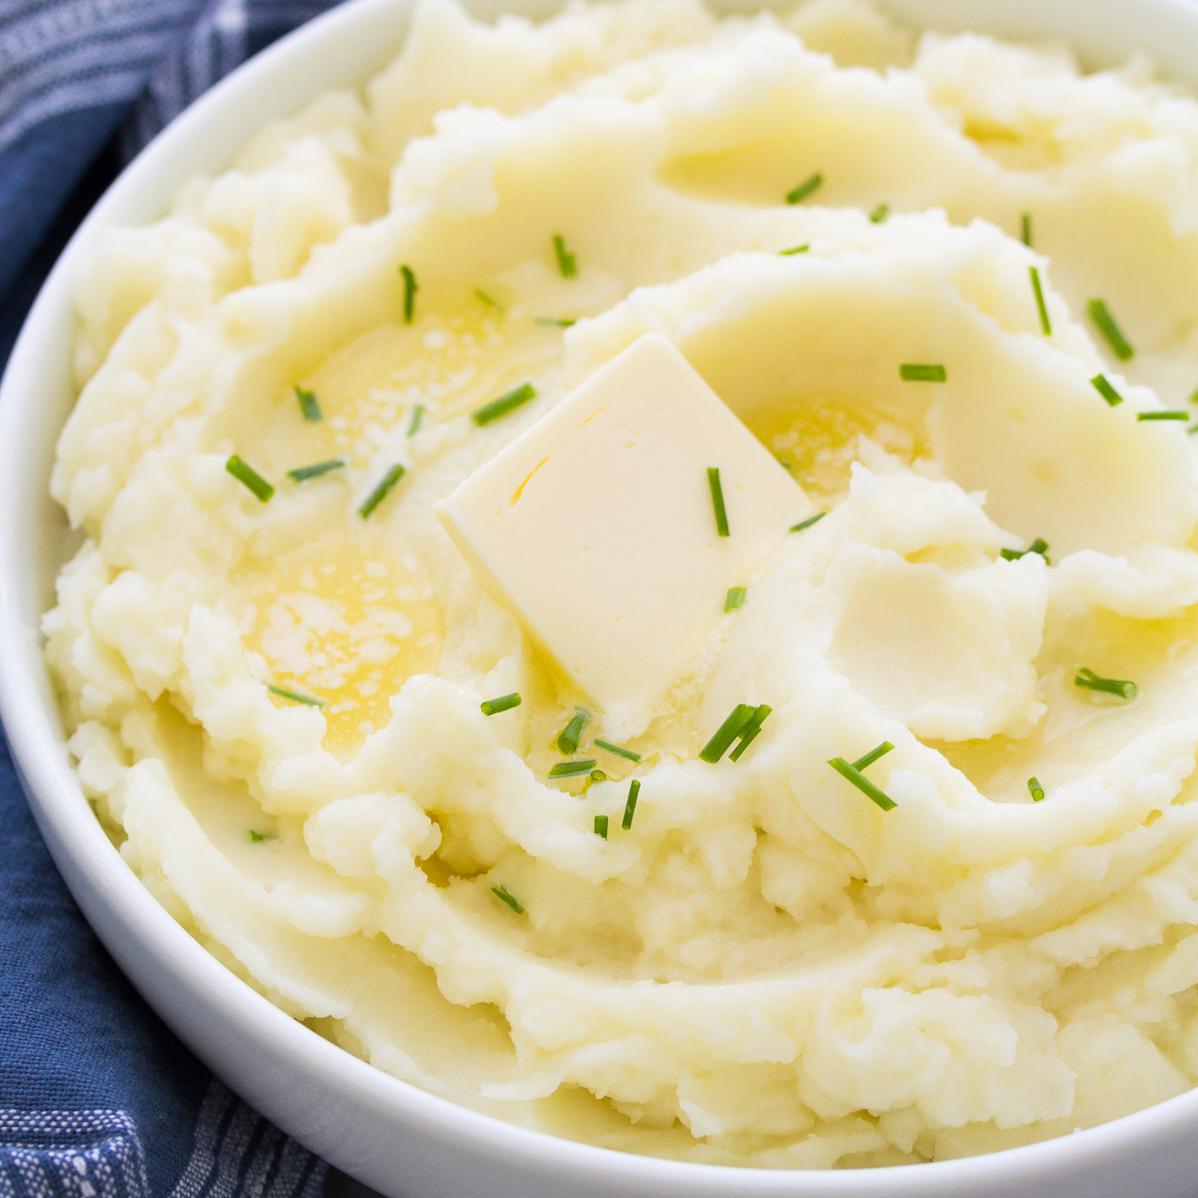  These Instant Pot mashed potatoes will become a staple in your recipe book.